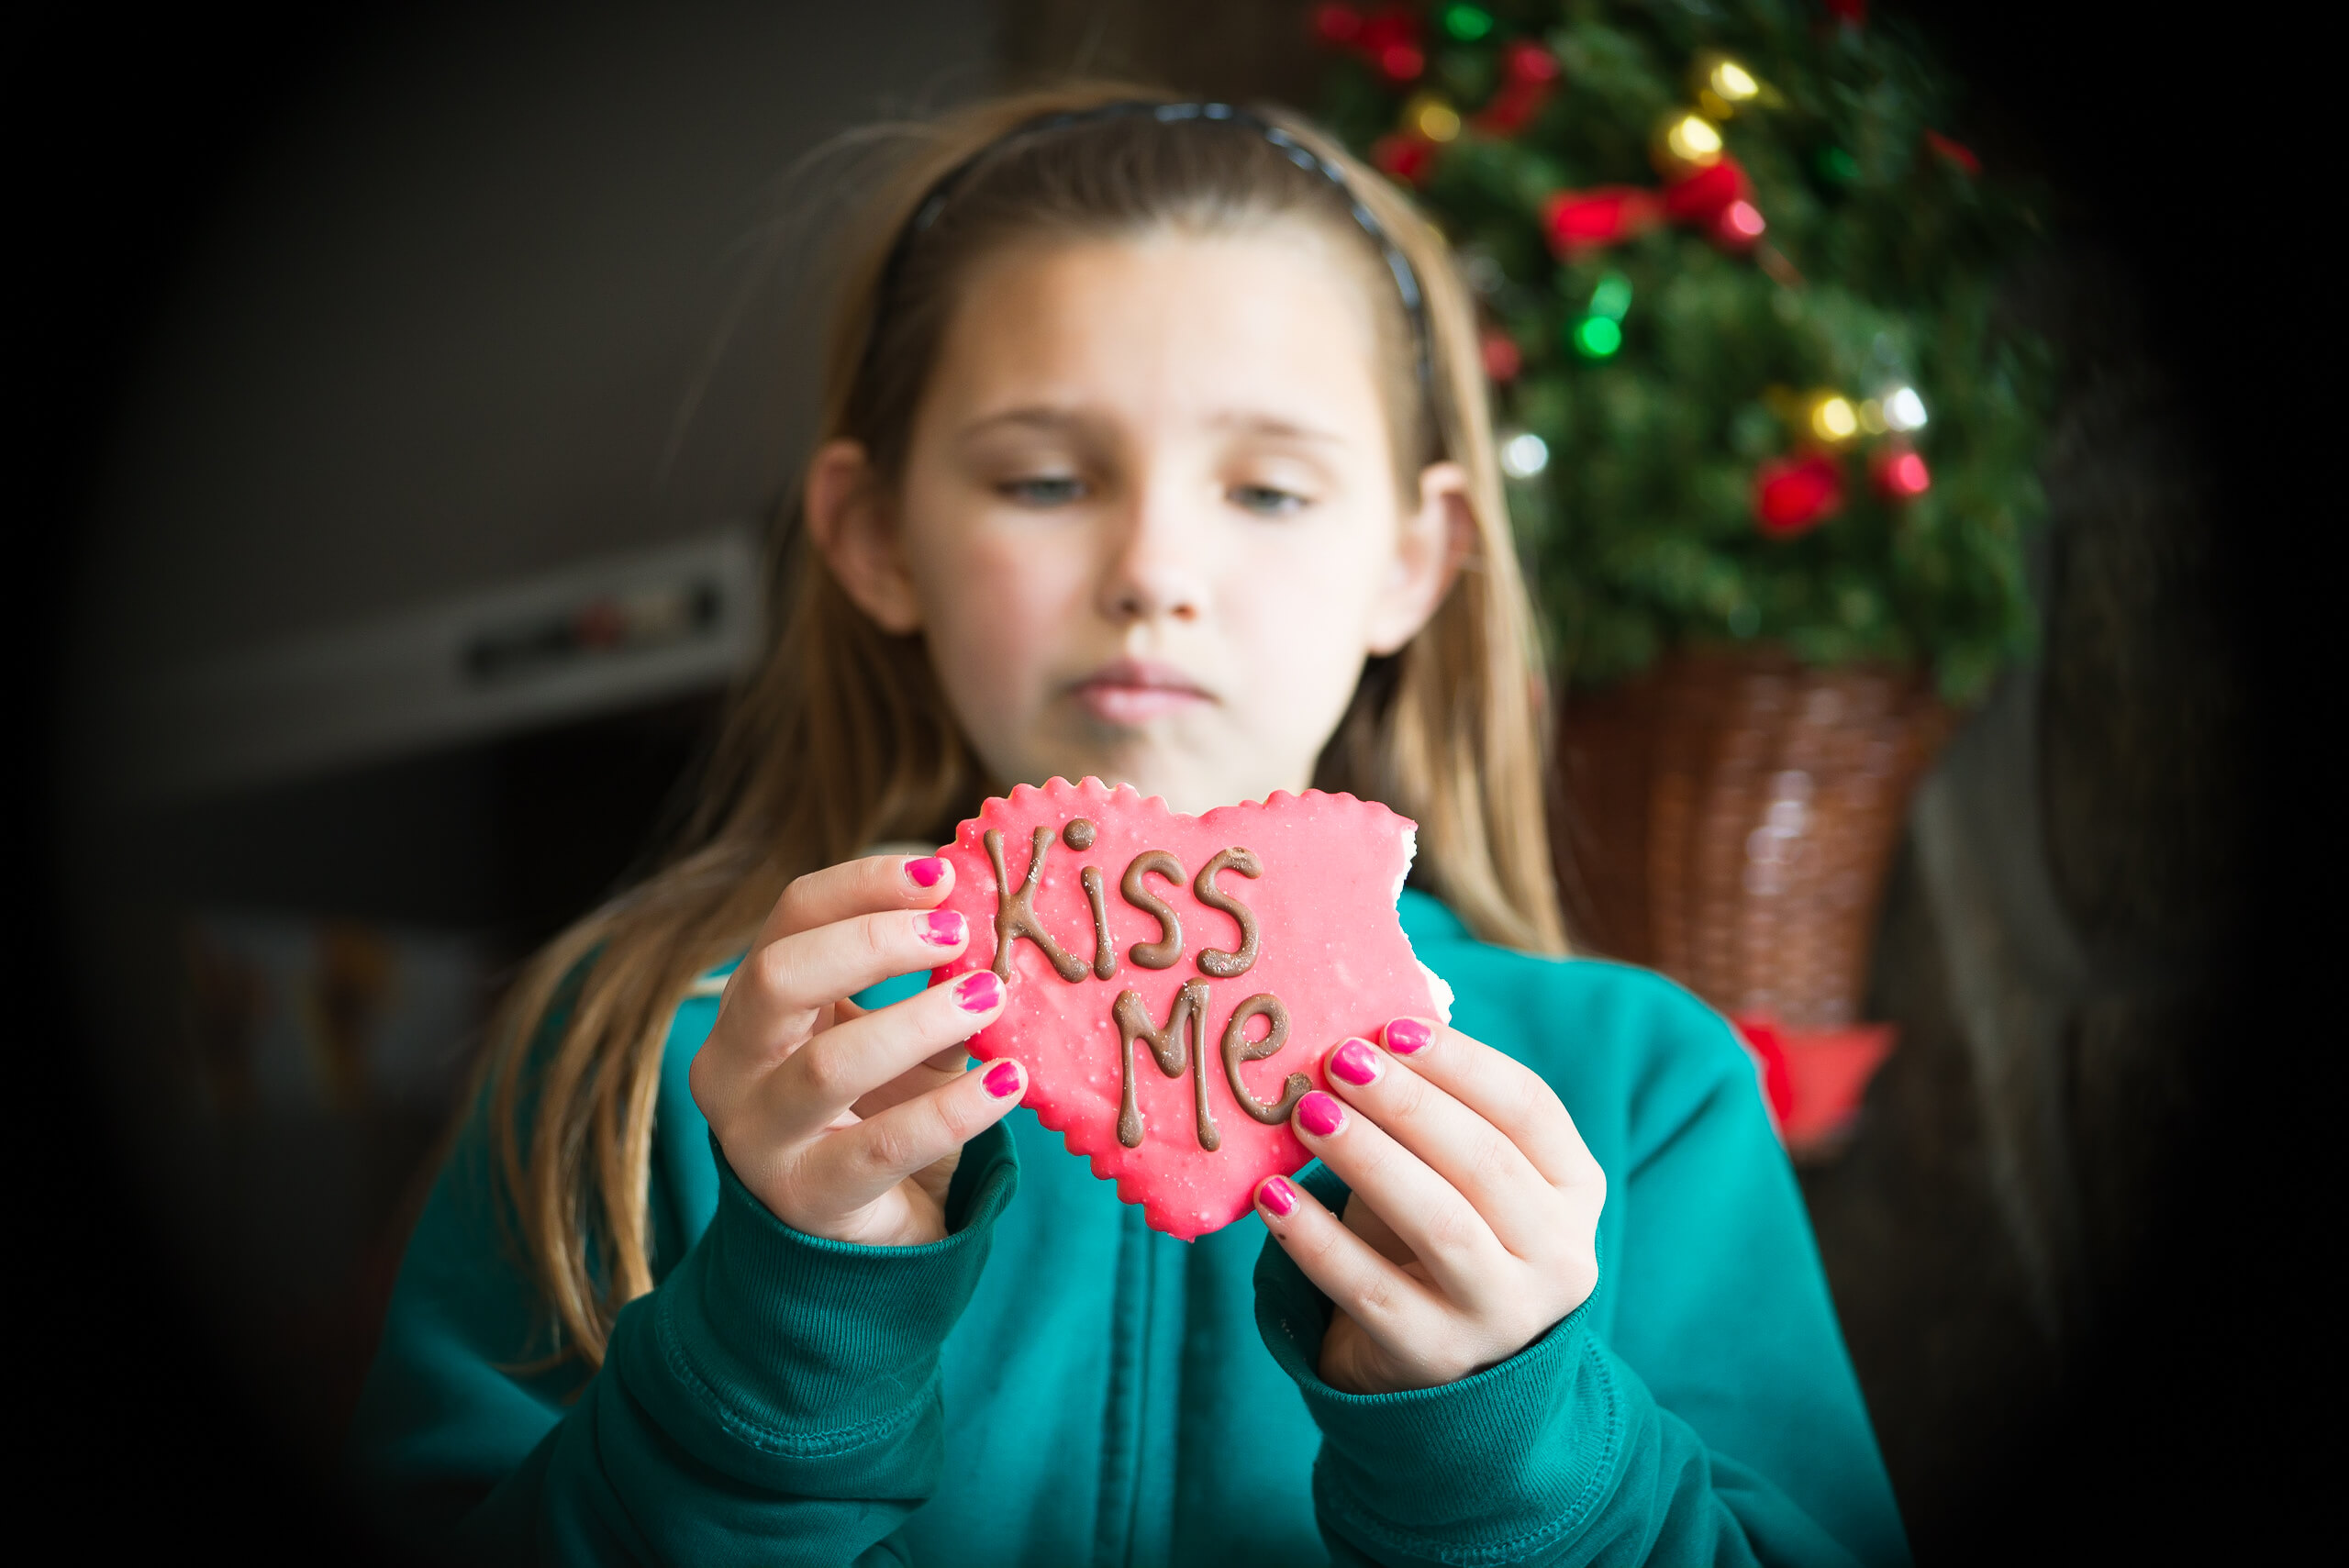 A cookie held forward by a child. The child looks down at the cookie. The cookie is a heart shape, has a bite taken out of it, and reads "kiss me."